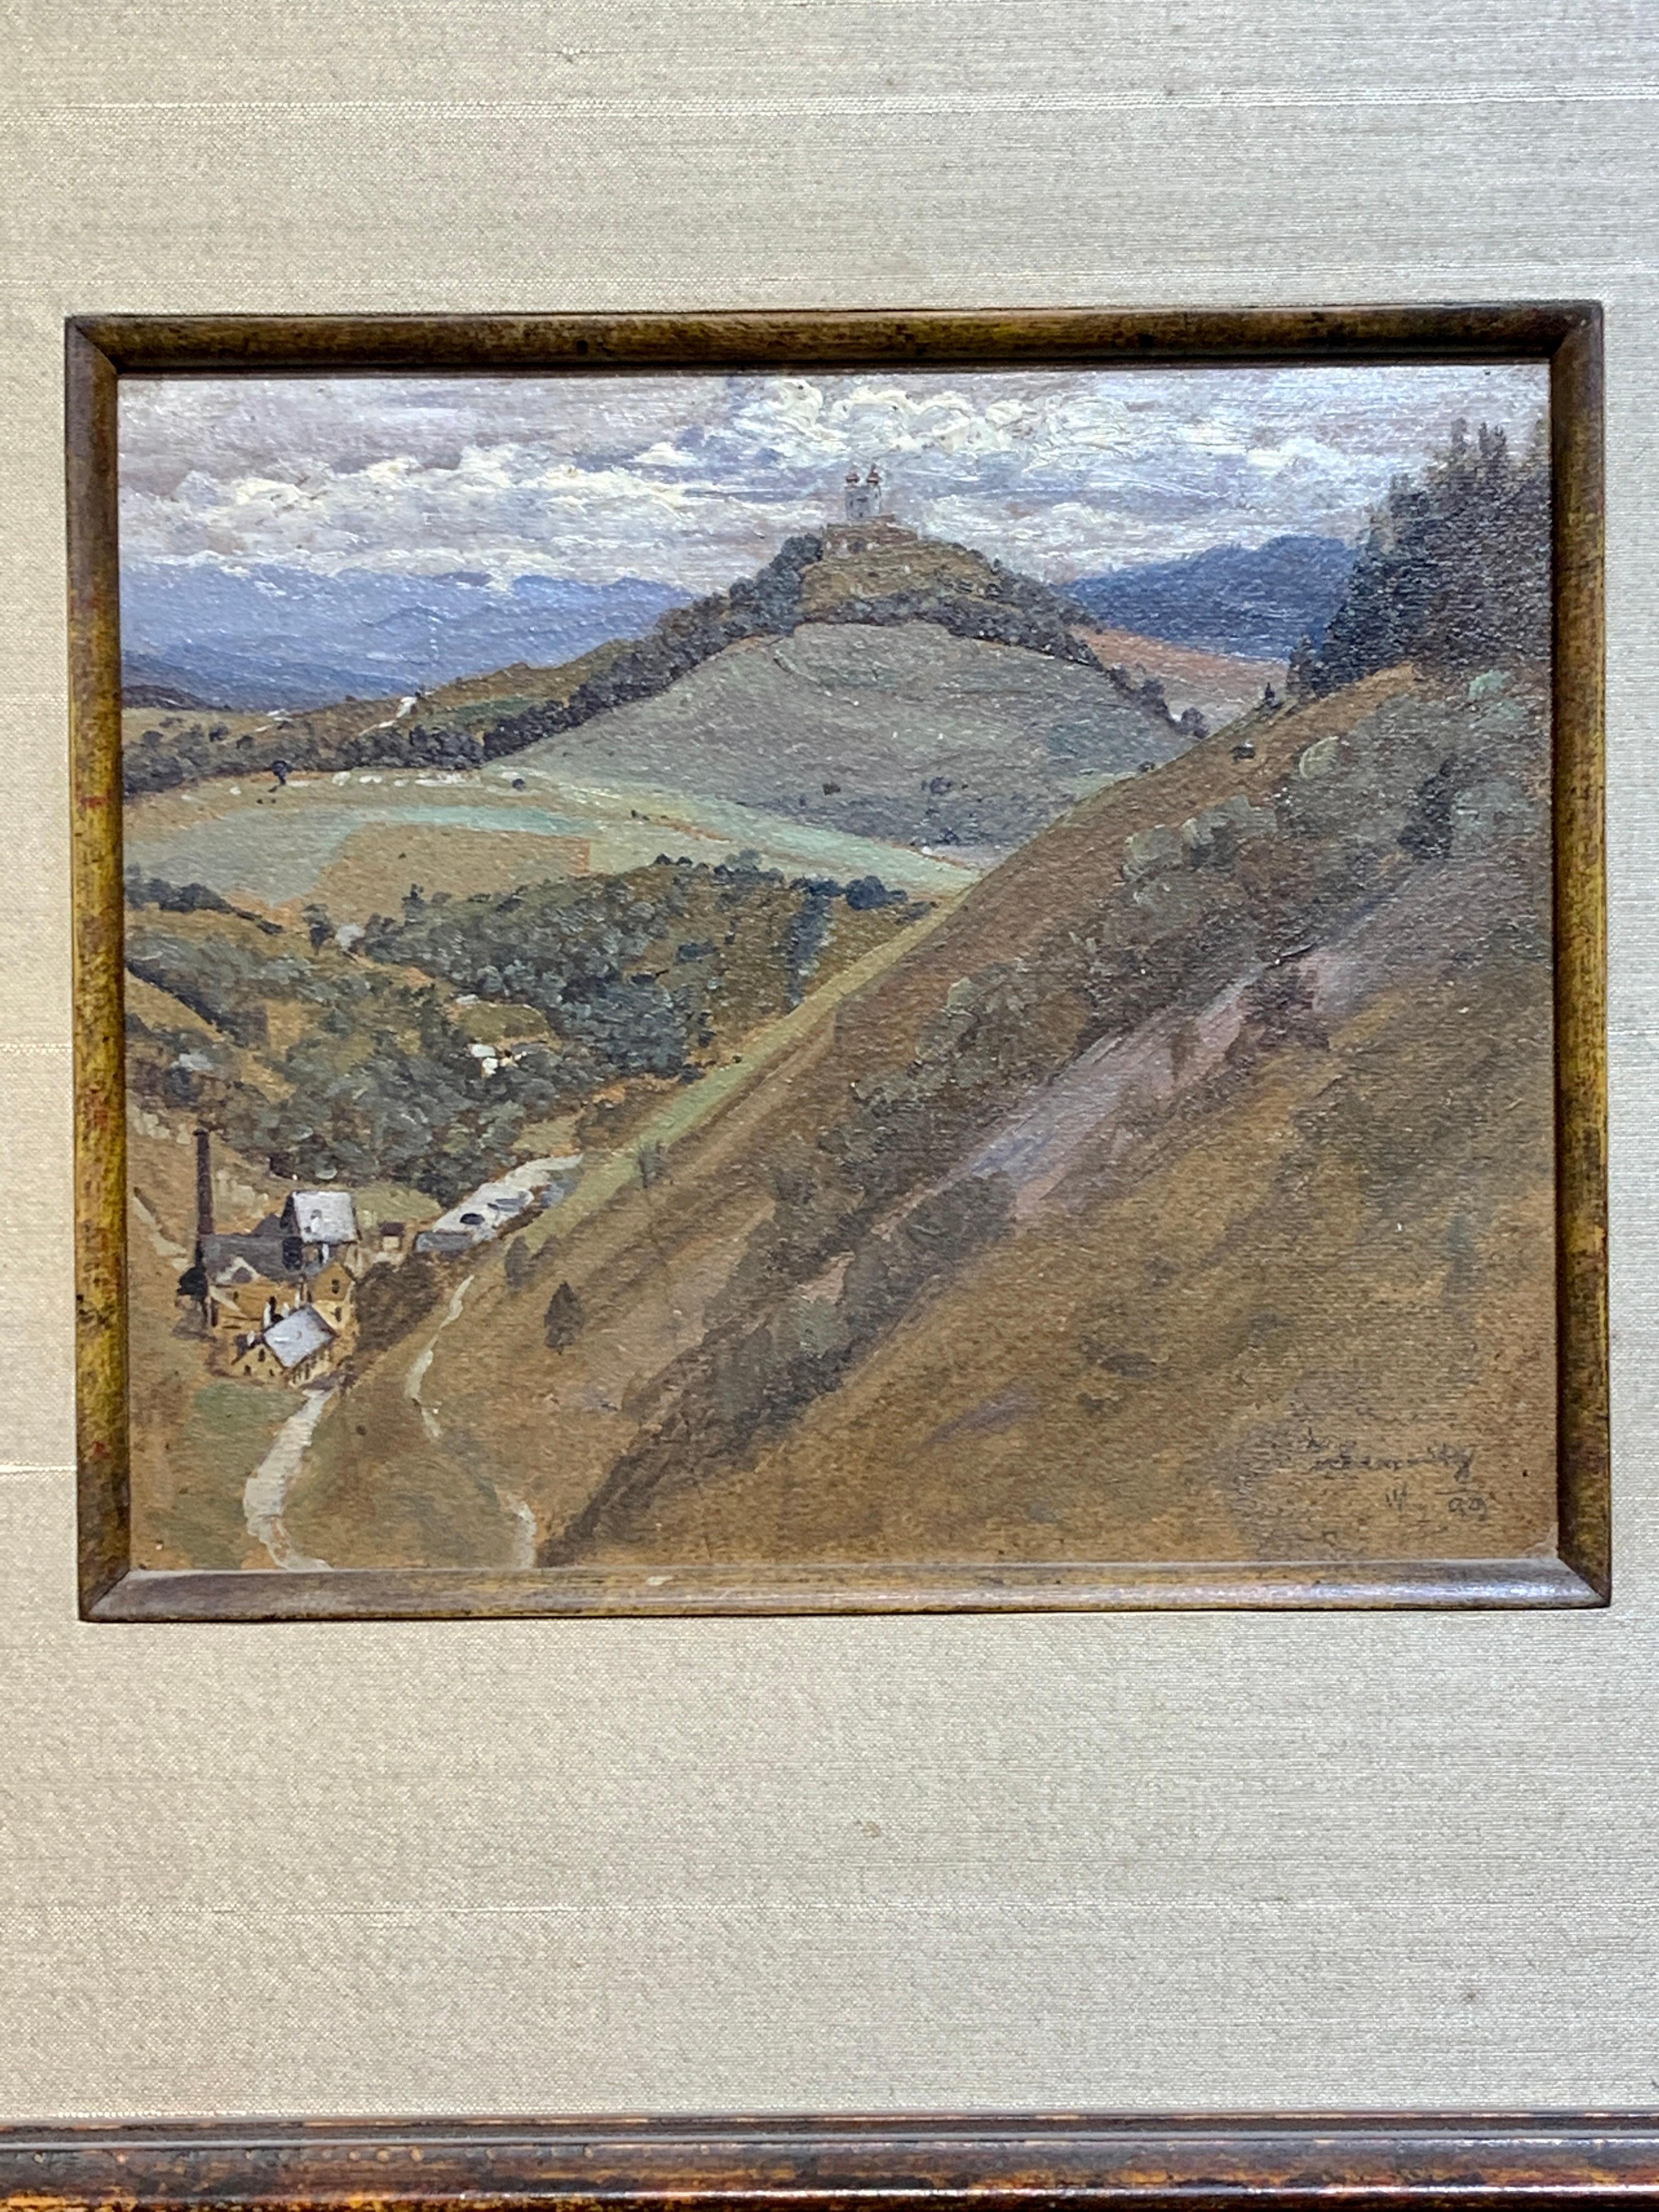 19th century Austrian mountain landscape with village, church and town  - Painting by Herman Reisz